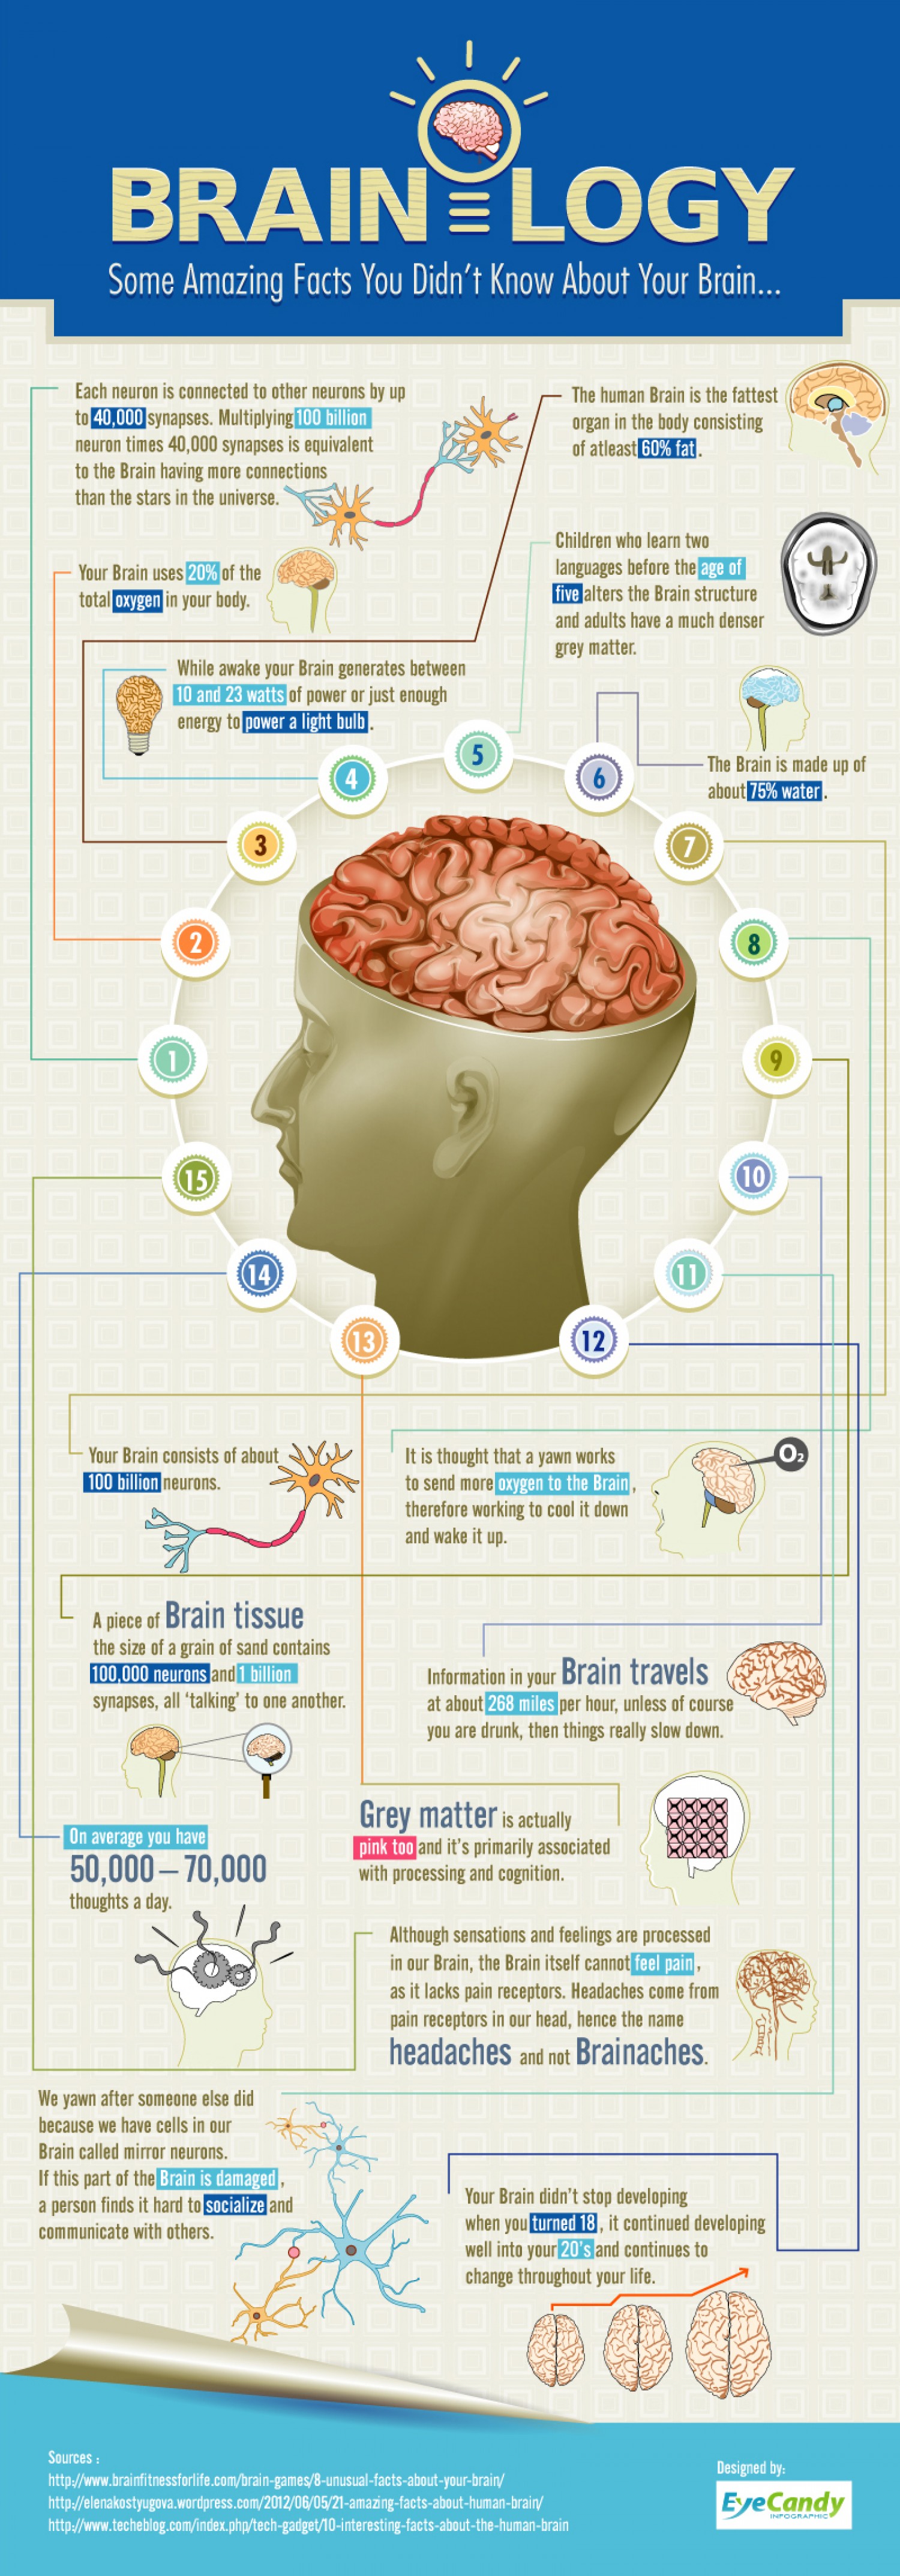 8 Unsual Facts About Your Brain